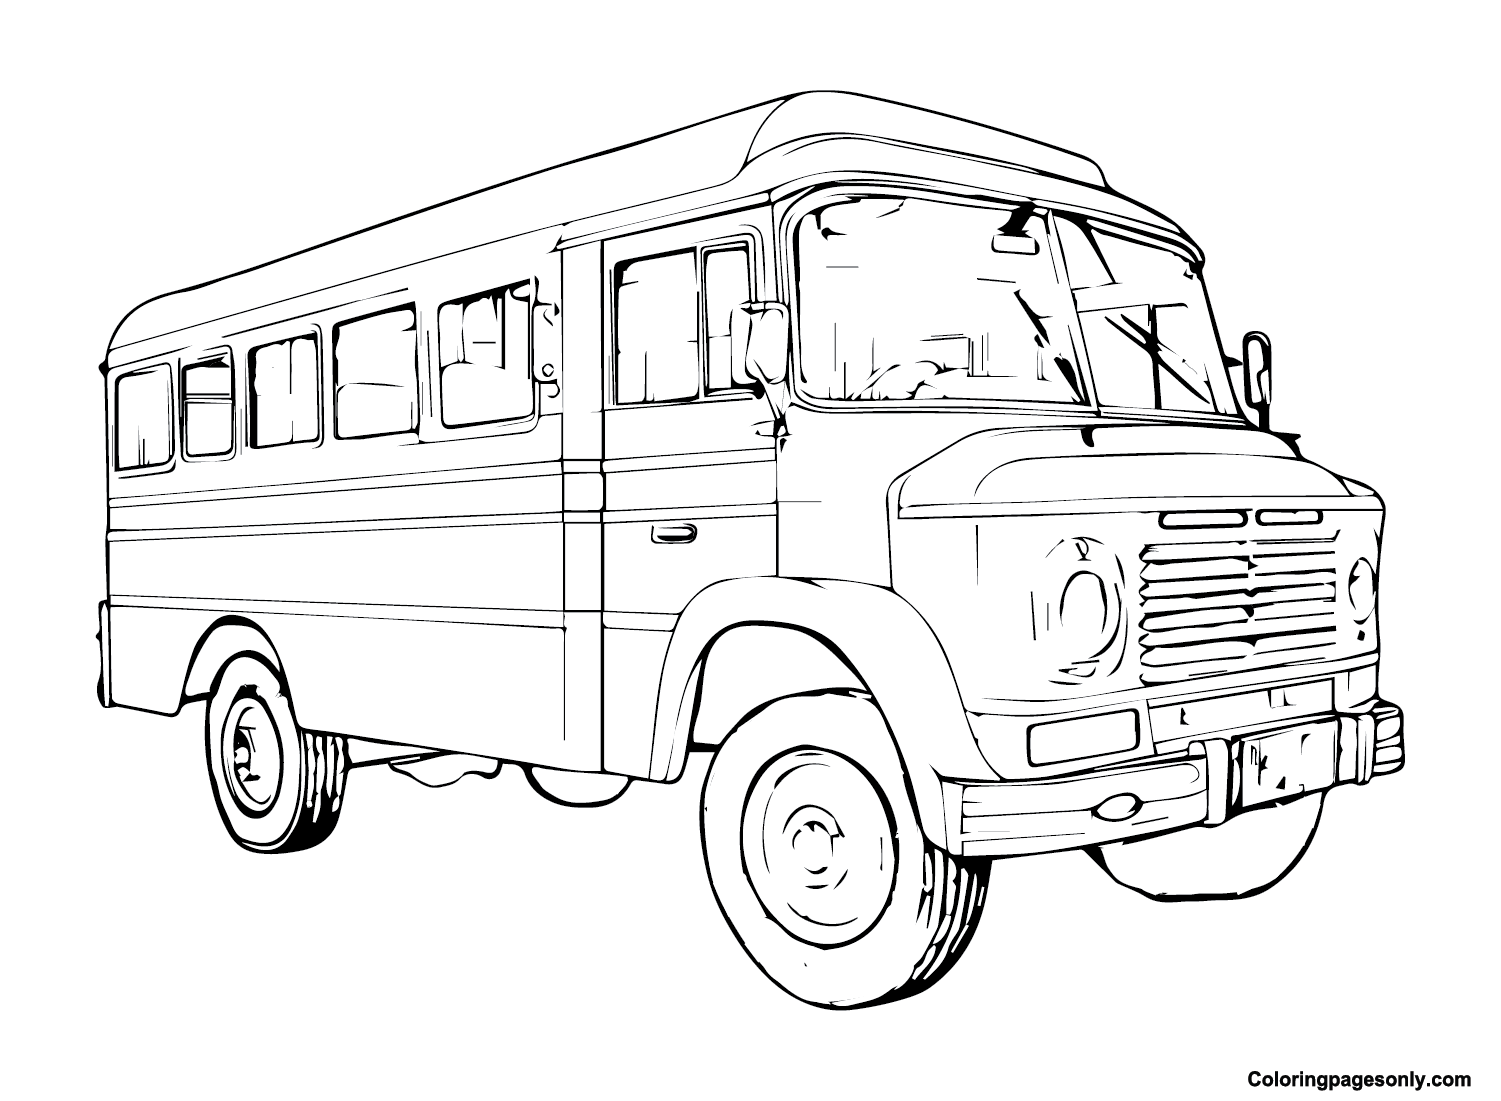 Jeepney color Sheets Coloring Pages